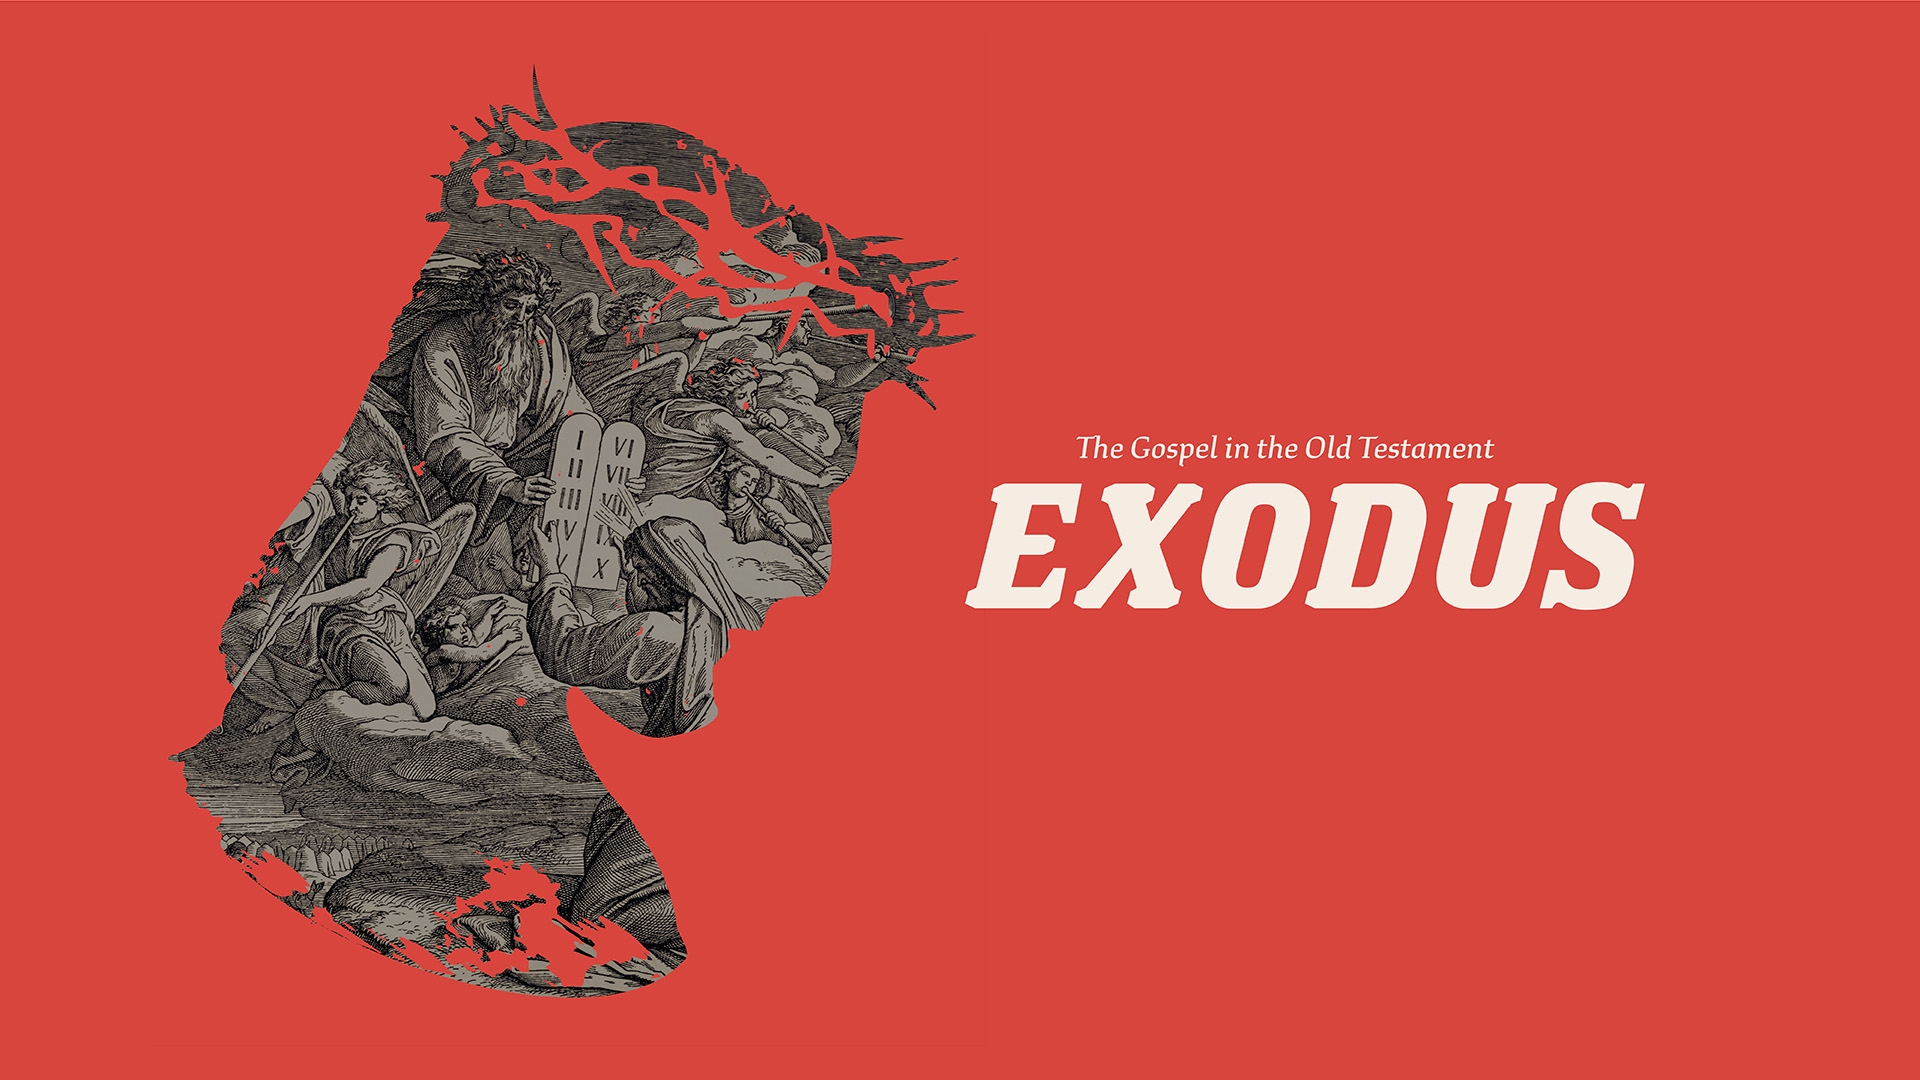 Exodus: The Gospel in the Old Testament graphic